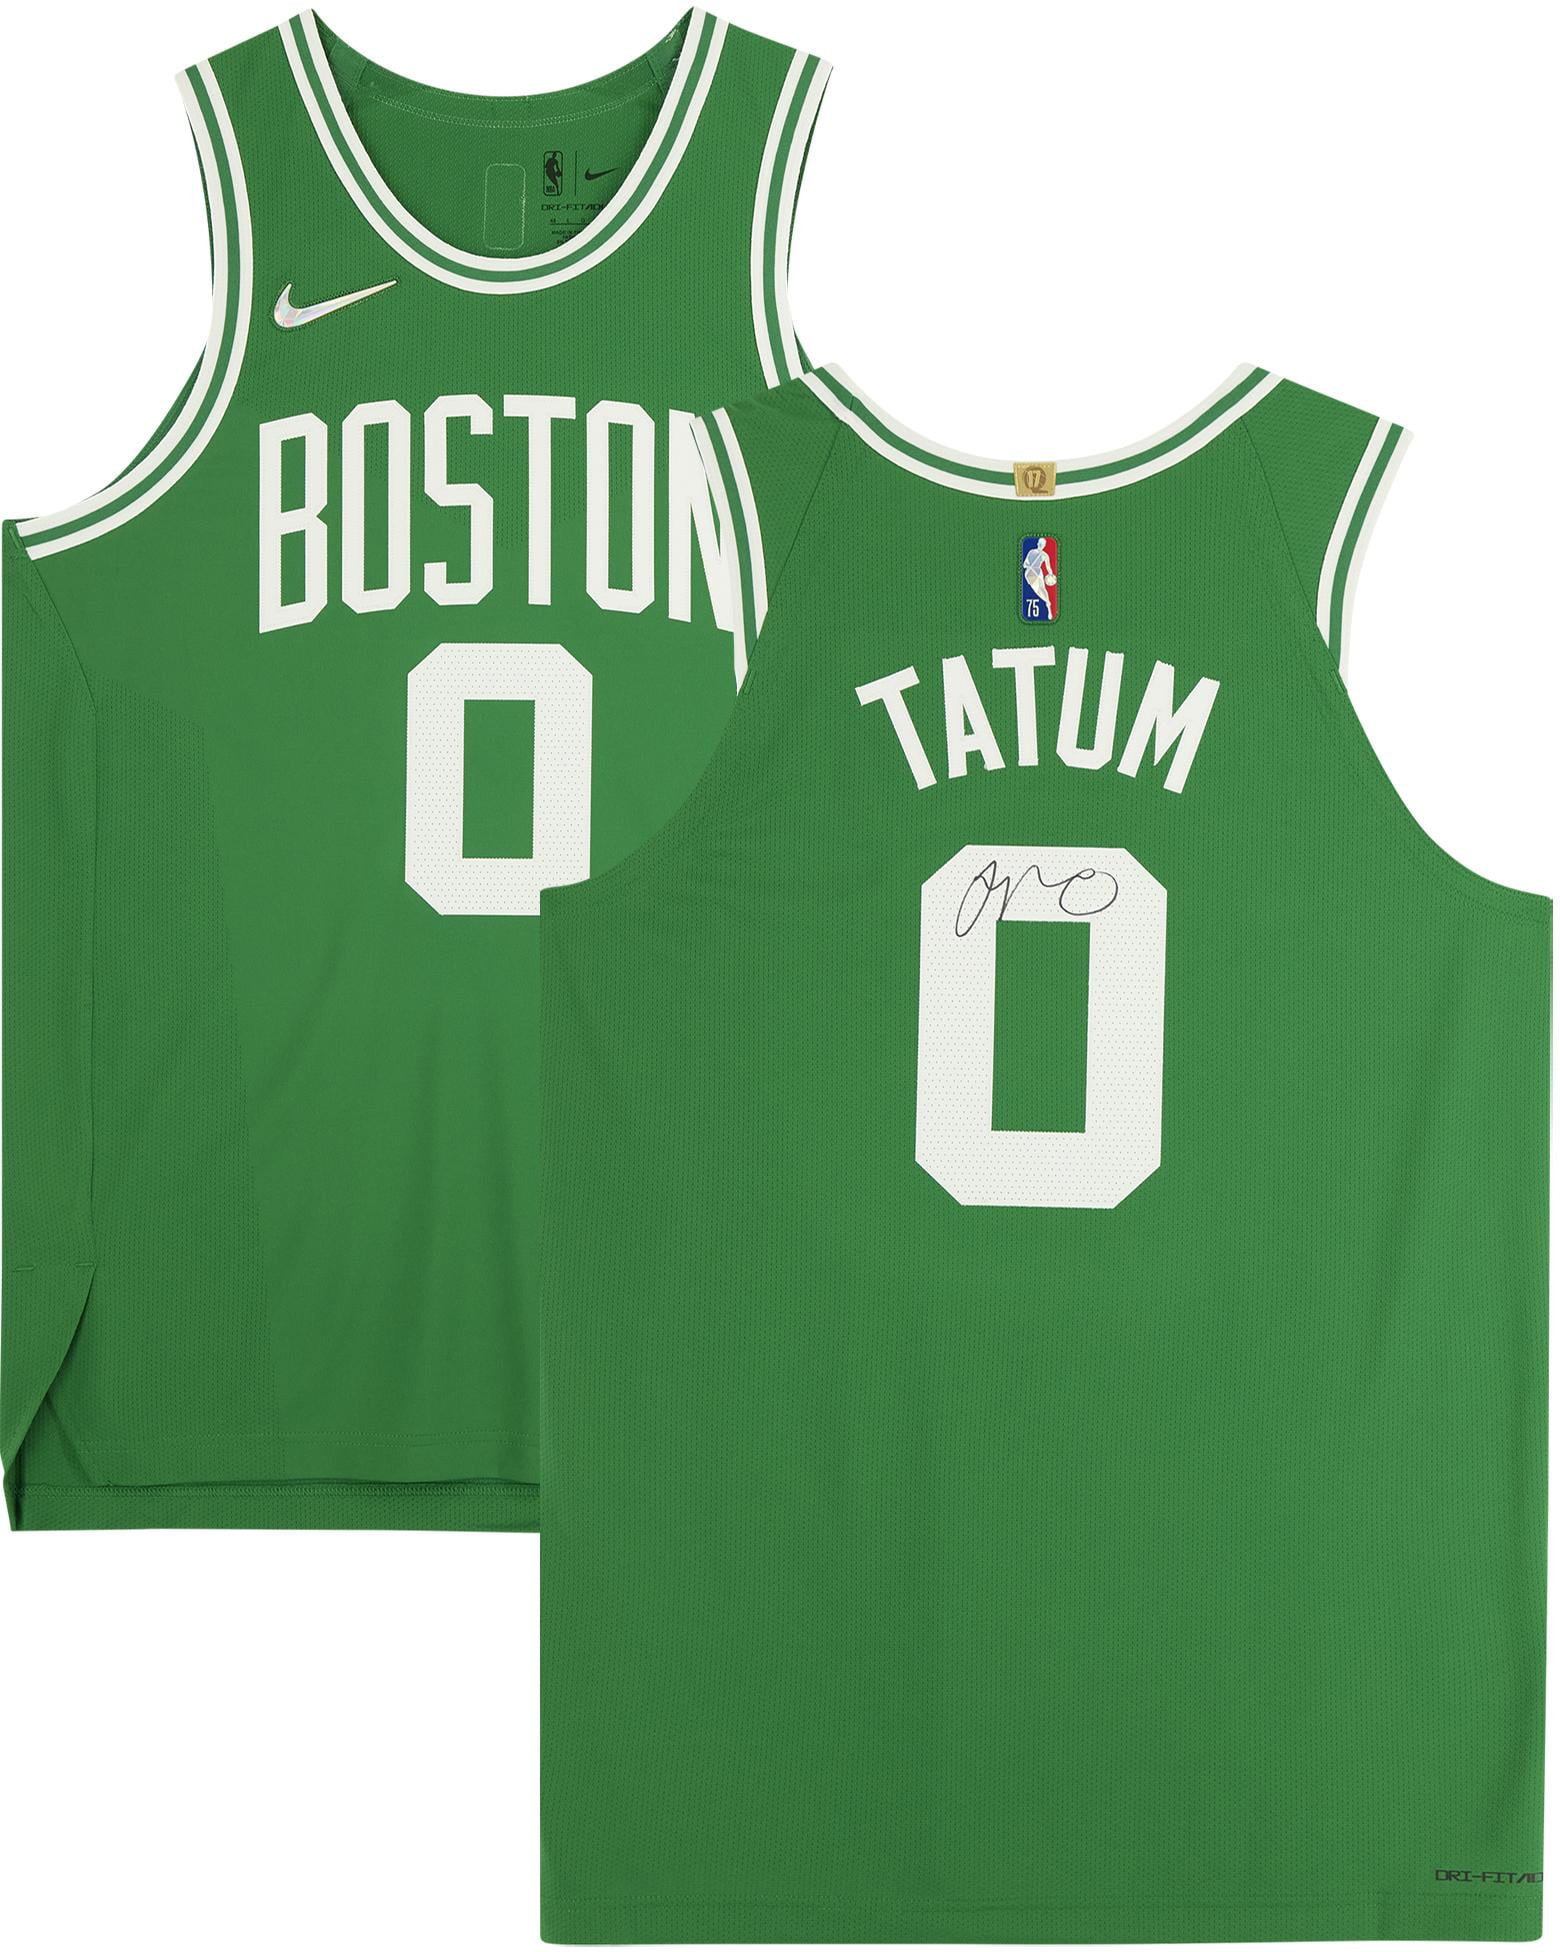 How to buy signed Jayson Tatum, Larry Bird and other authentic